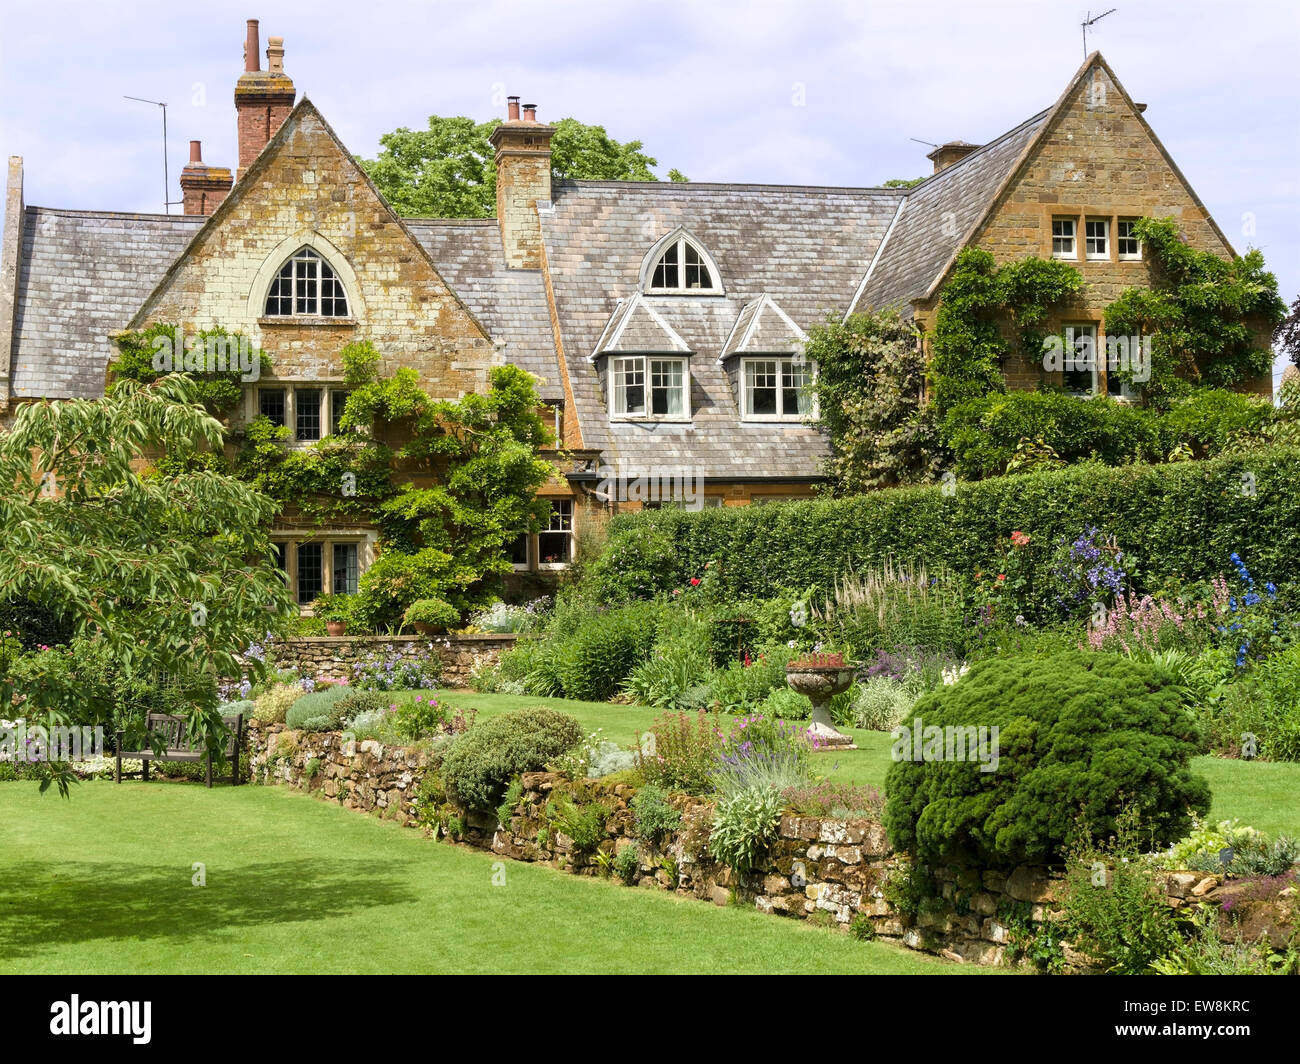 Coton Manor House and gardens, Coton, Northamptonshire, England, UK. Banque D'Images